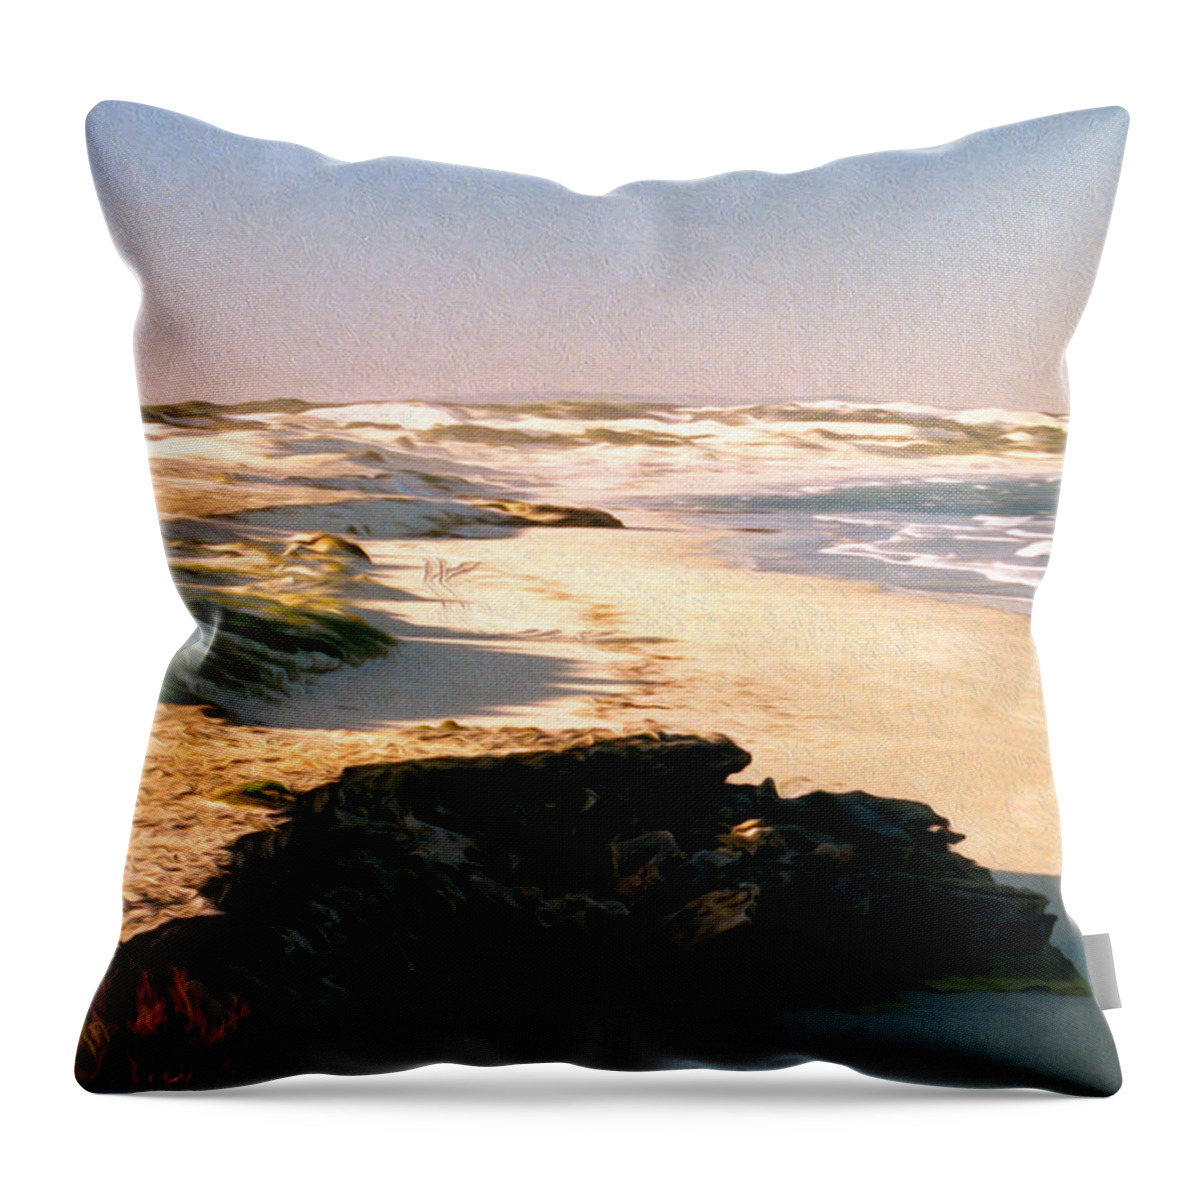 Arniston Waenhuiskrans Archival Quality Fine Art Reproductions Throw Pillow featuring the digital art Arniston Waenhuiskrans by Vincent Franco